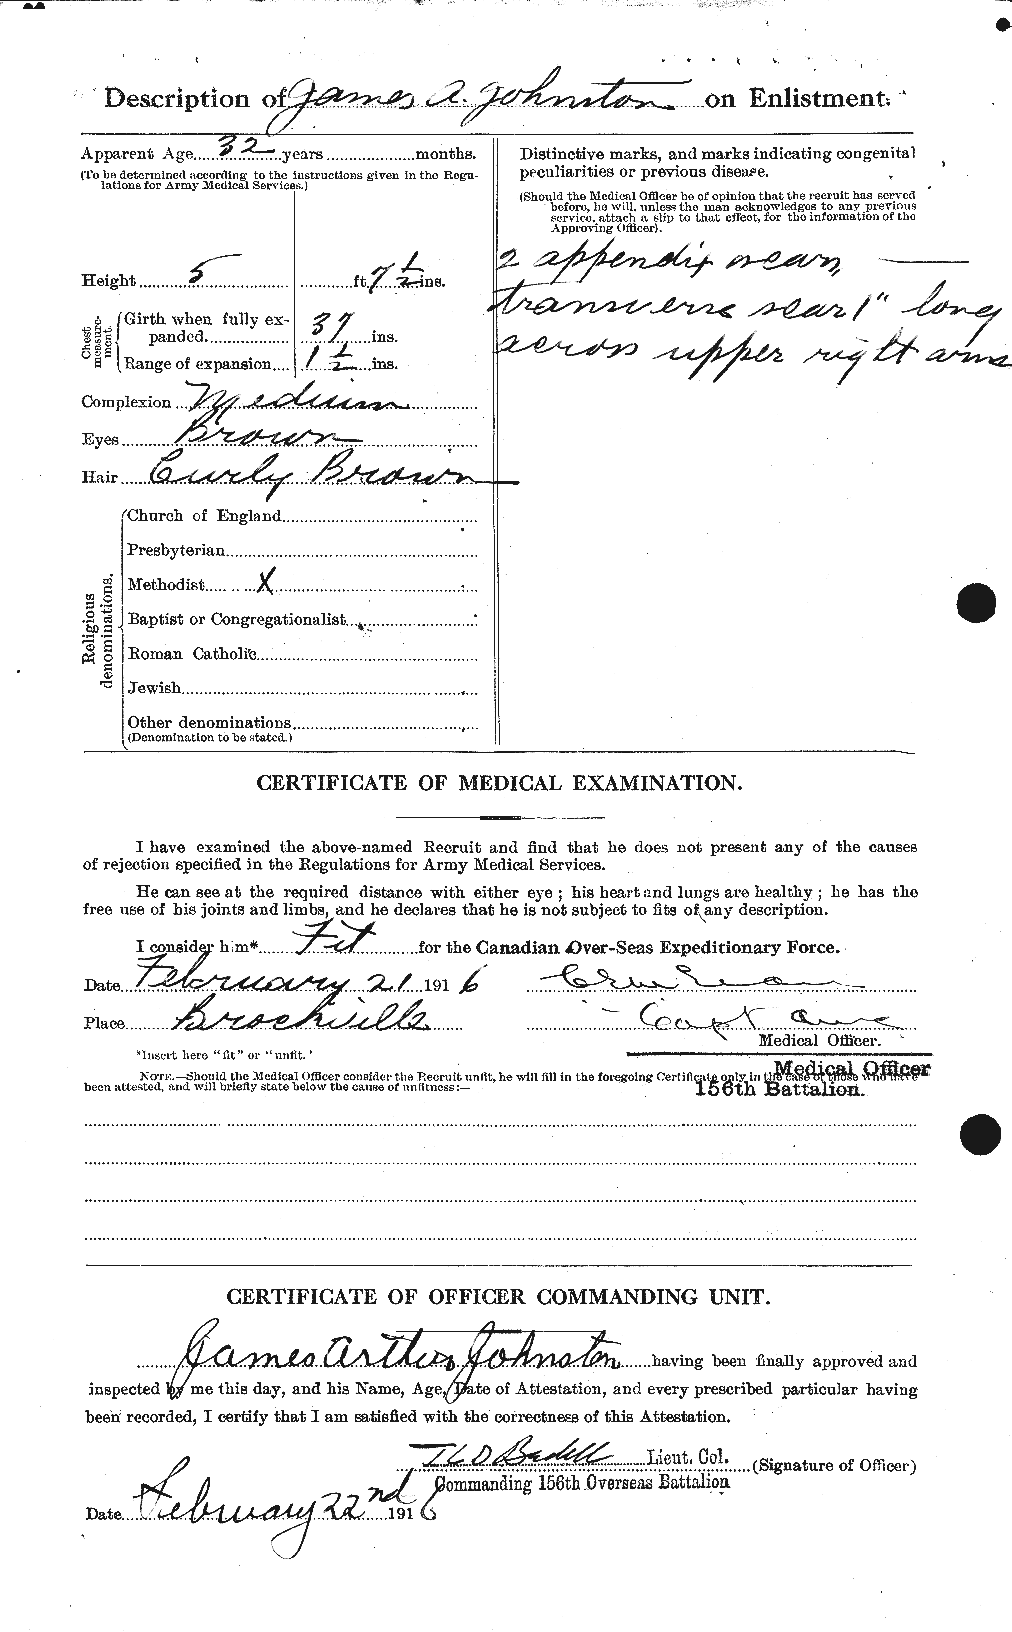 Personnel Records of the First World War - CEF 420631b